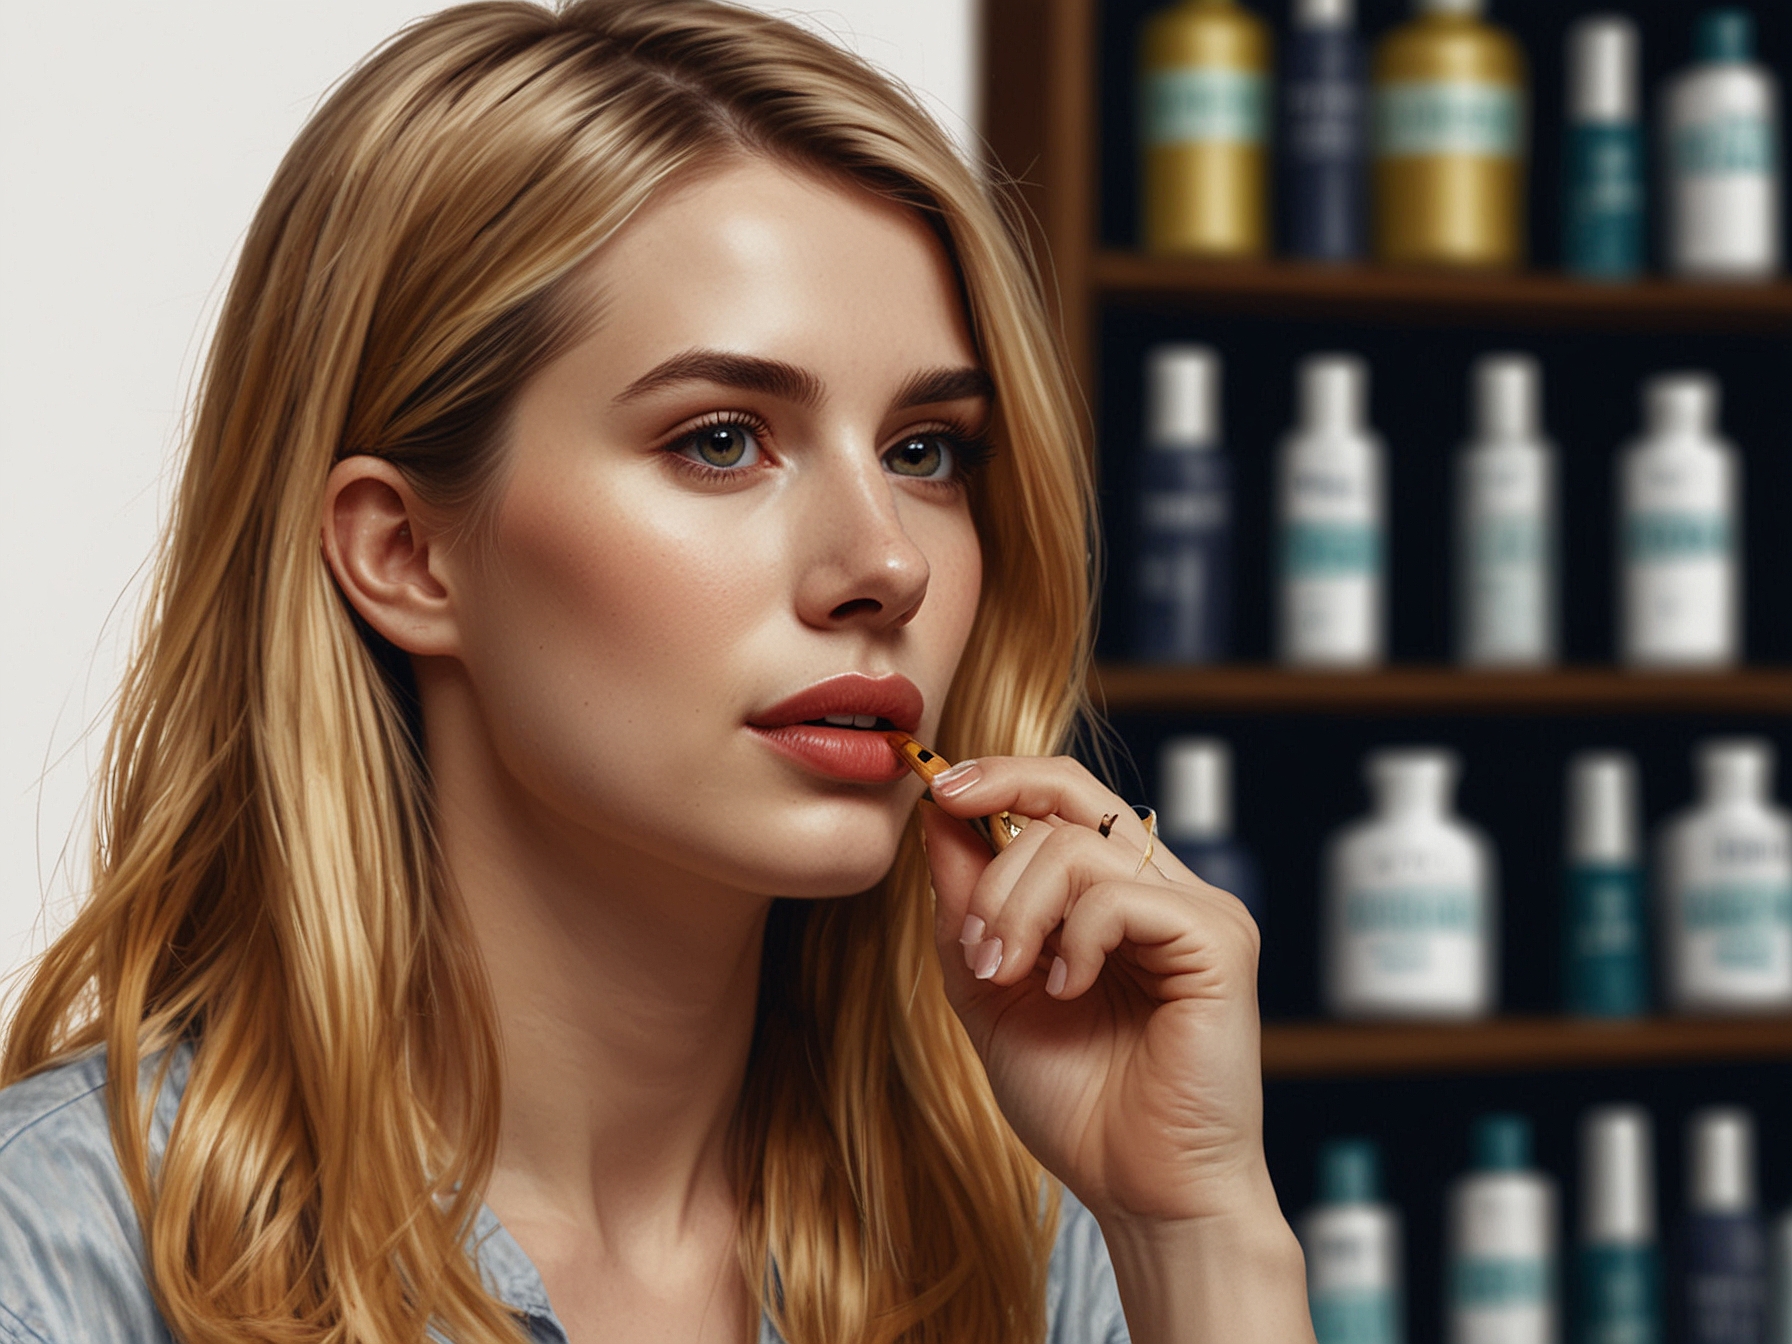 Emma Roberts applying her recommended hair serum to keep her long, luscious blonde hair healthy. The image captures her consistent routine and dedication to hair care.